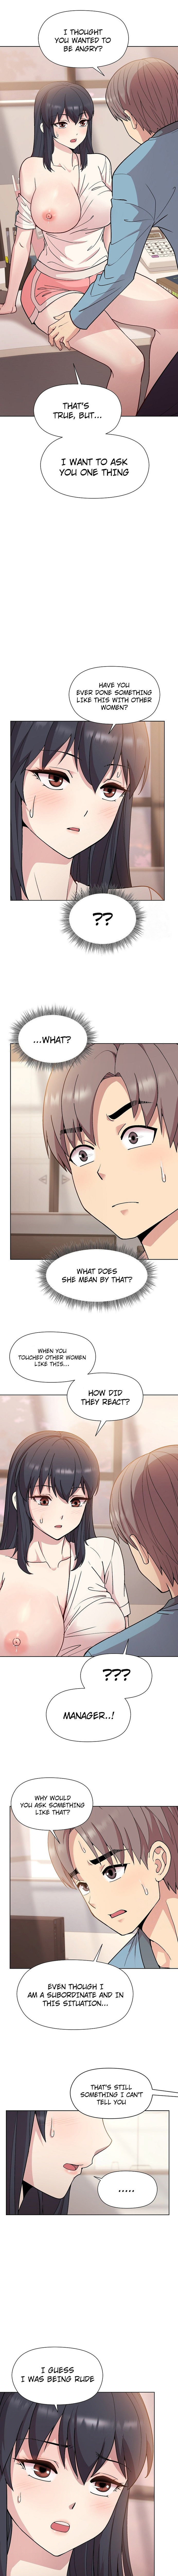 Playing a game with my Busty Manager - Chapter 3 Page 4